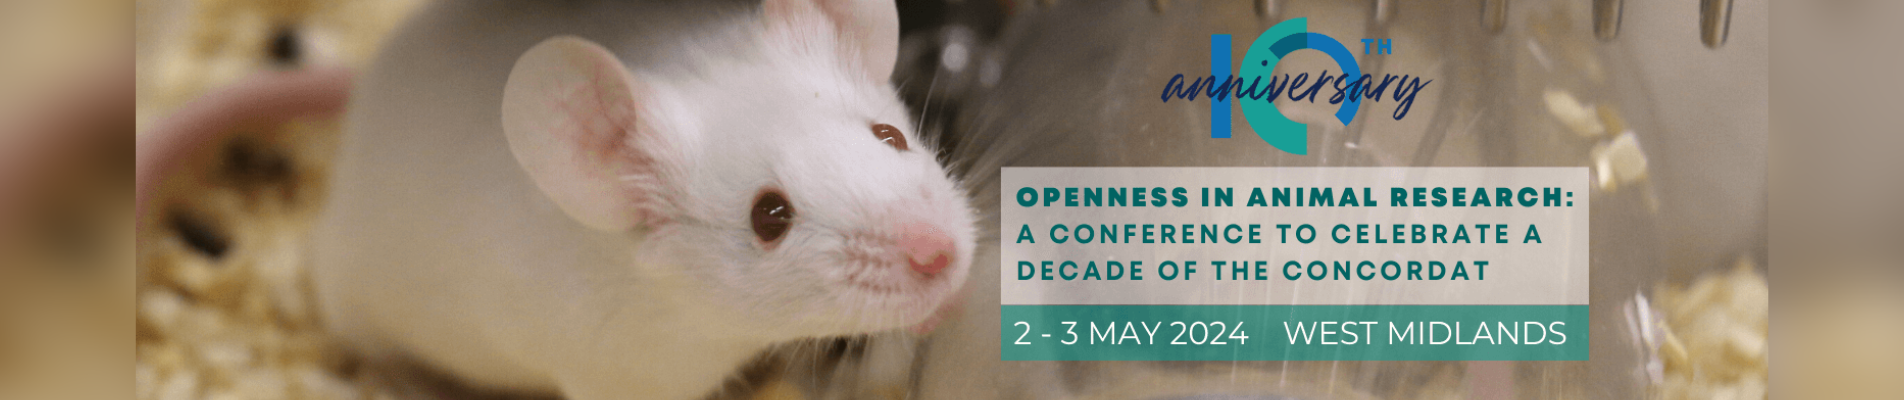 Openness in Animal Research Conference 2024